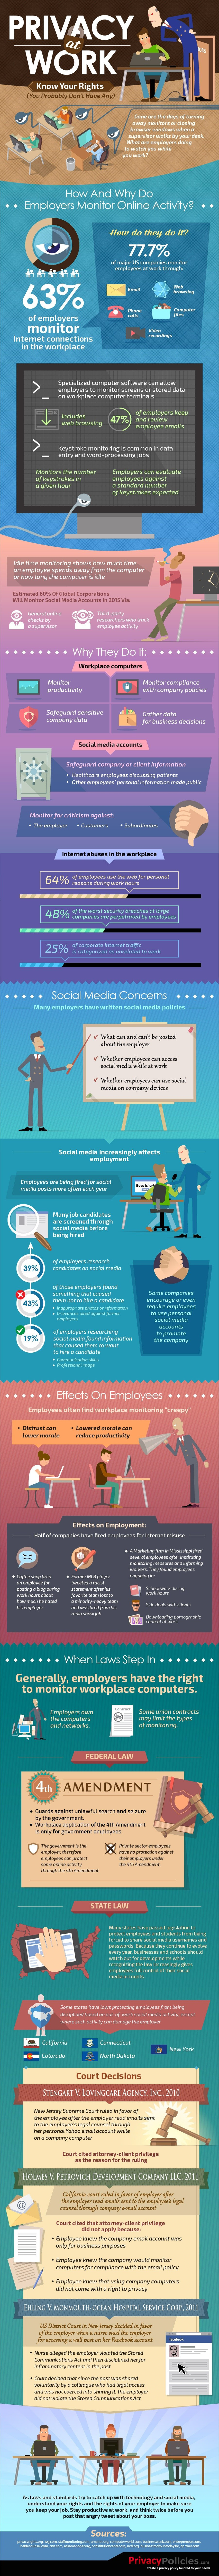 Privacy at Work: Know Your Rights - An Infographic from PrivacyPolicies.com Blog